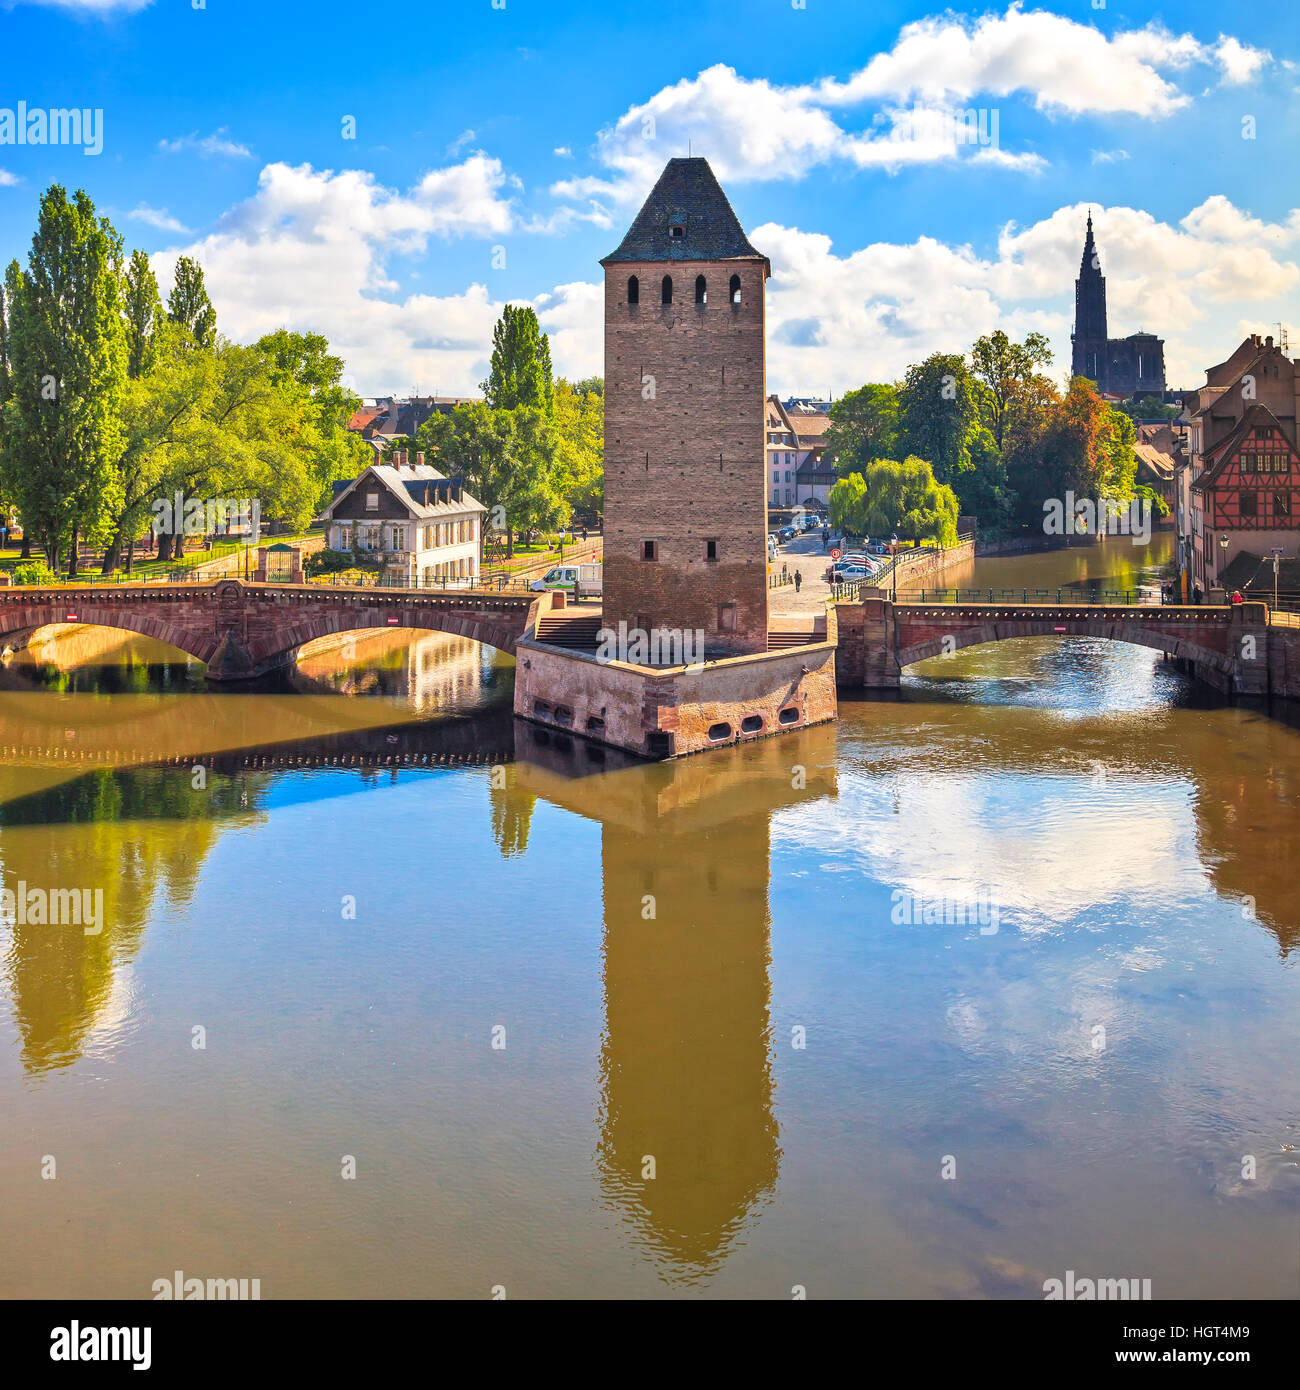 Strasbourg, medieval bridge Ponts Couverts and Cathedral, view from Barrage Vauban. Alsace, France. Stock Photo